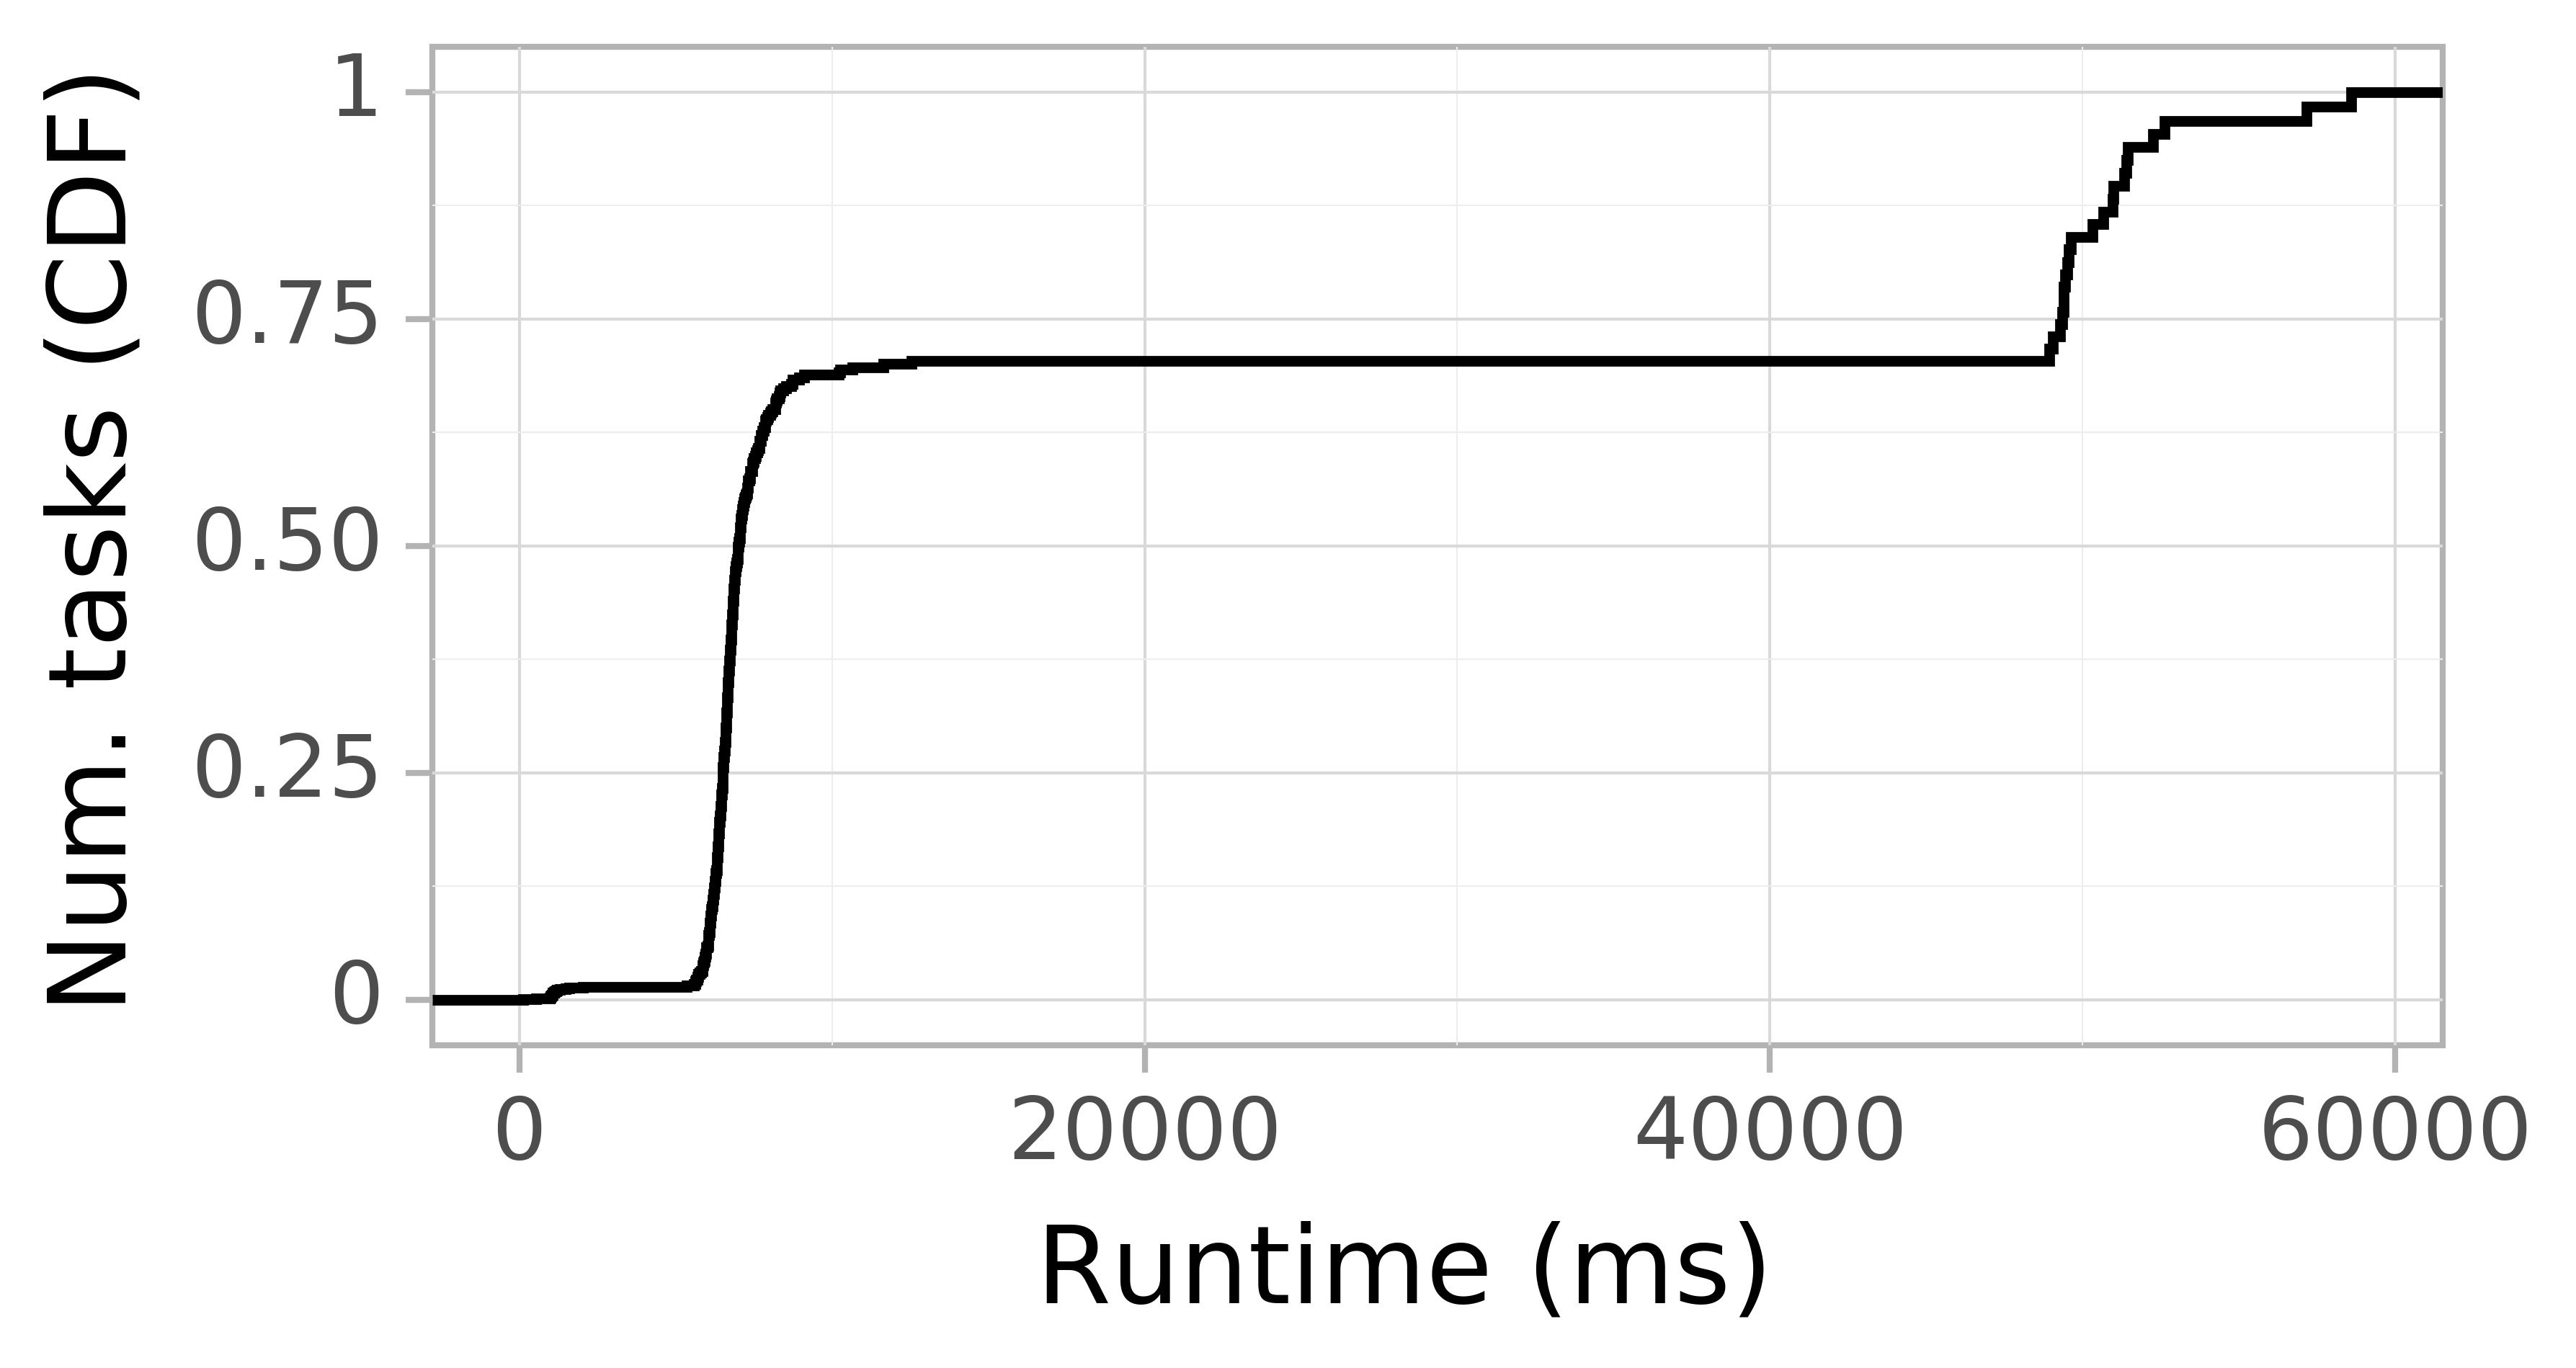 Task runtime CDF graph for the askalon-new_ee60 trace.